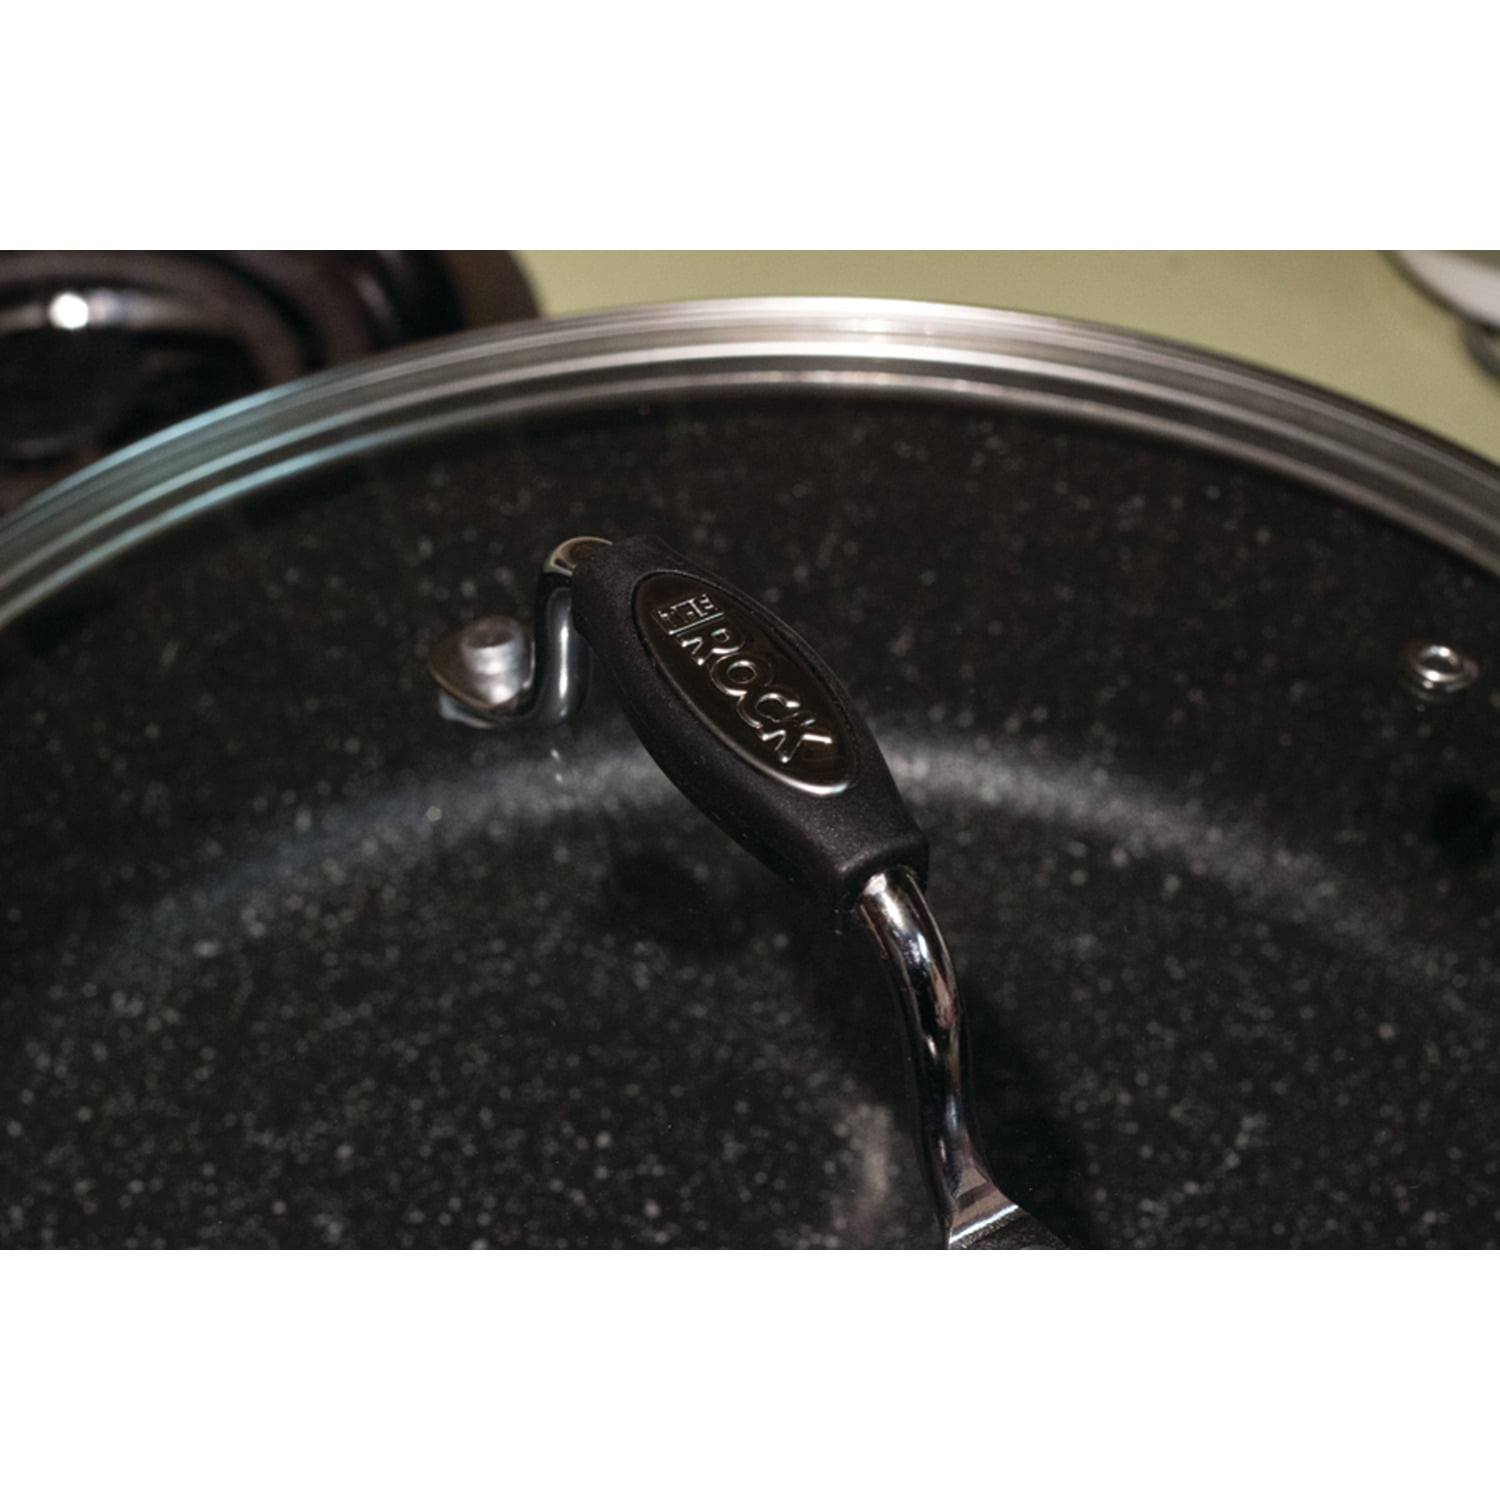 Starfrit The Rock 8 Fry Pan with Bakelite Handle Cooking Frying Broiling  Dishwasher Safe Oven Safe 8 Frying Pan Rock Cast Stainless Steel Handle -  Office Depot